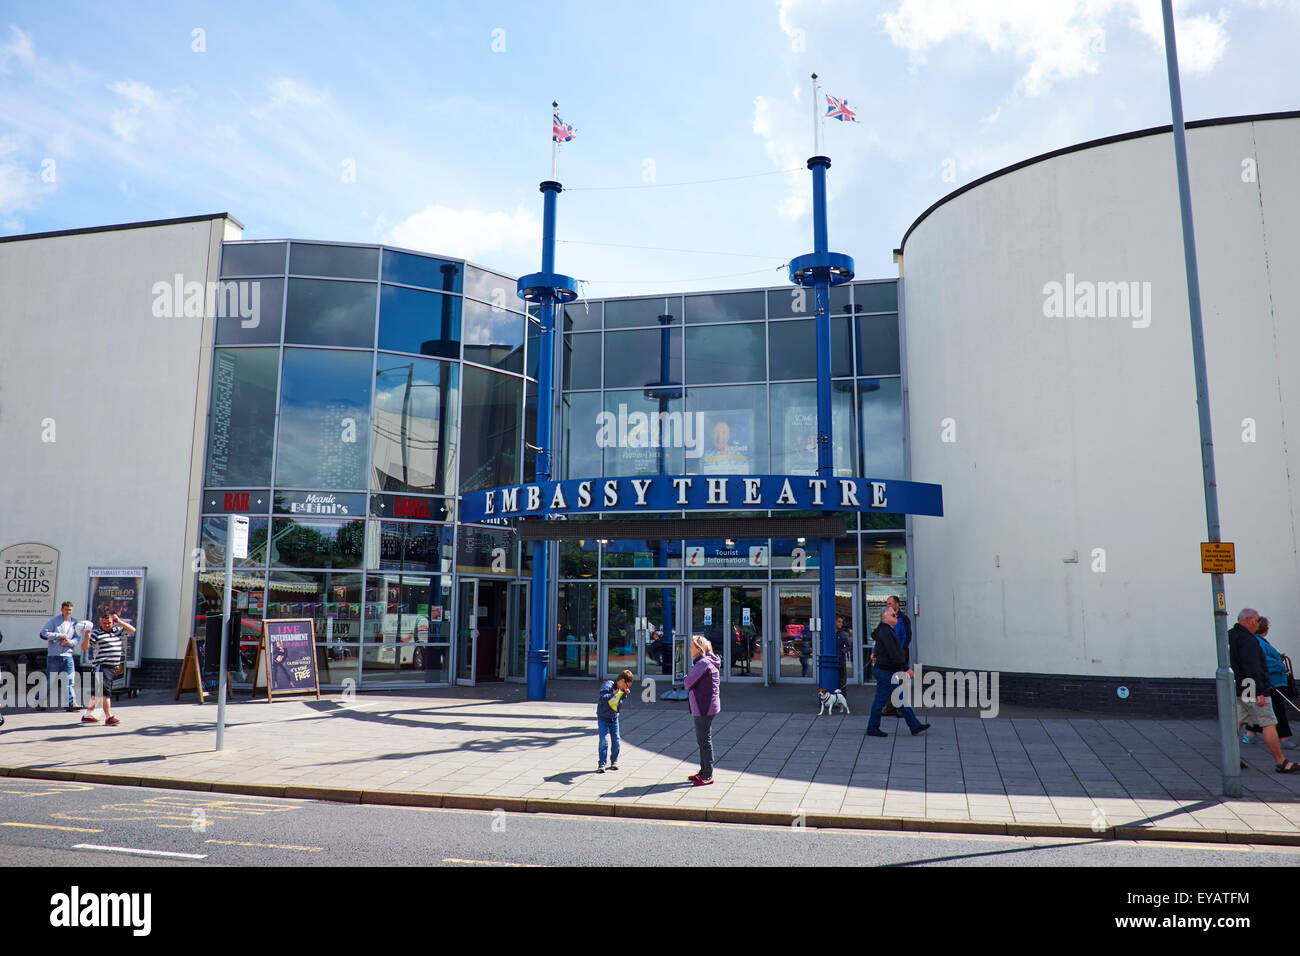 Embassy Theatre Grand Parade Skegness Lincolnshire UK Stock Photo